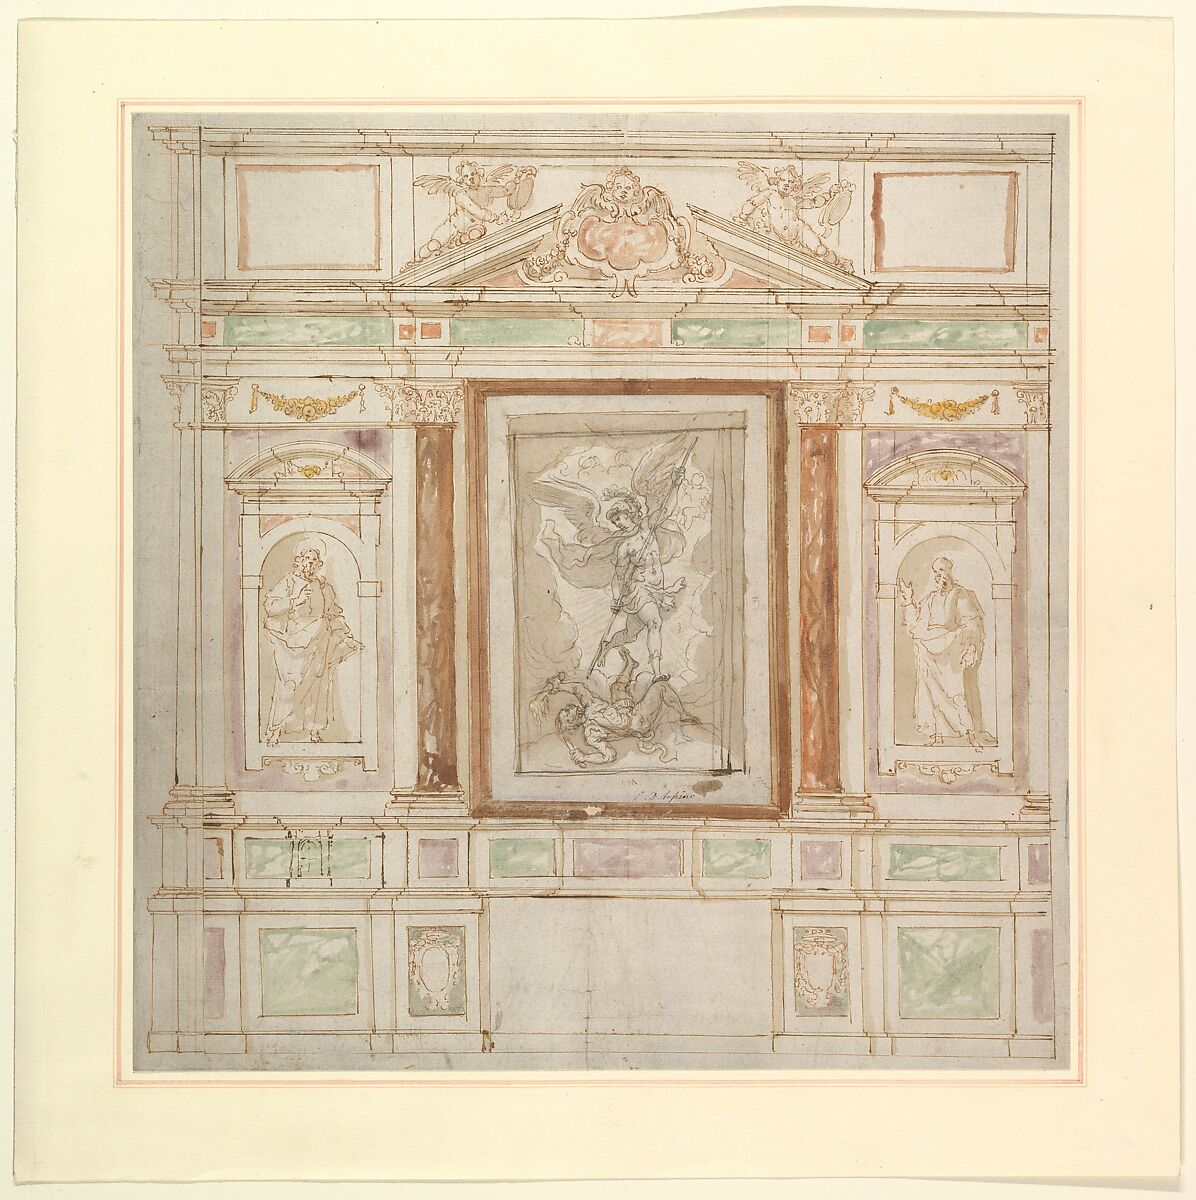 Architectural Design for a Monumental Altar, with a Composition with Saint Michael Against Satan and two Saints (Saints Peter and Paul?), Anonymous  , Roman (?), XVII Century, Pen and brown ink, over black chalk, brush with green, purple, yellow, and brown washes, ruler incisions. 